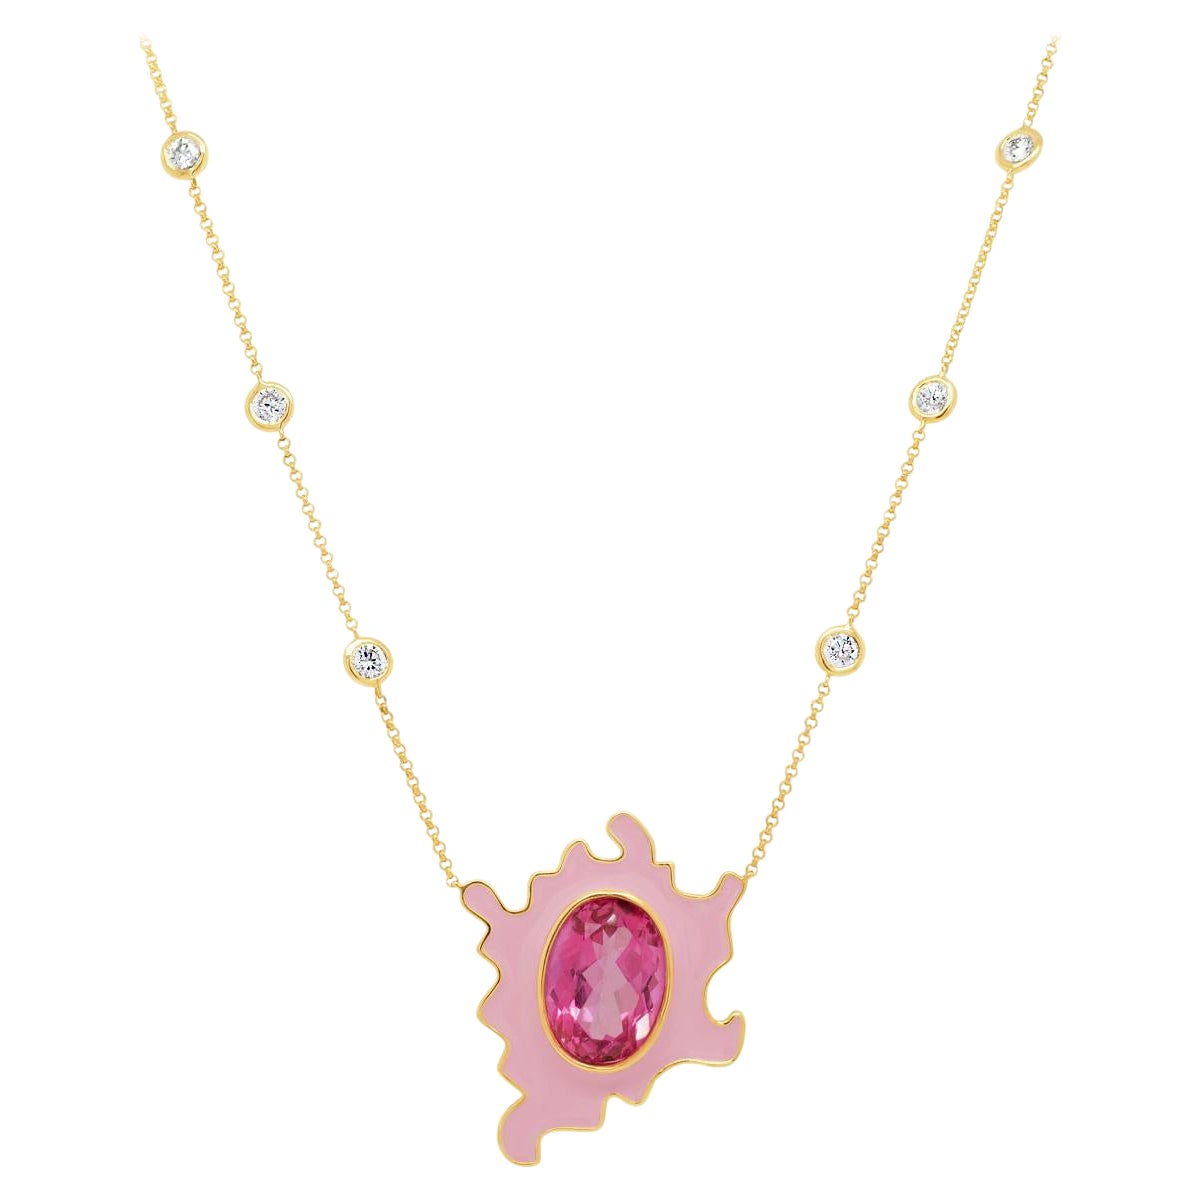 Psychedelic Solitaire Necklace 5.7GMS 6.15ctw Pink Tourmaline and Enamel For Sale